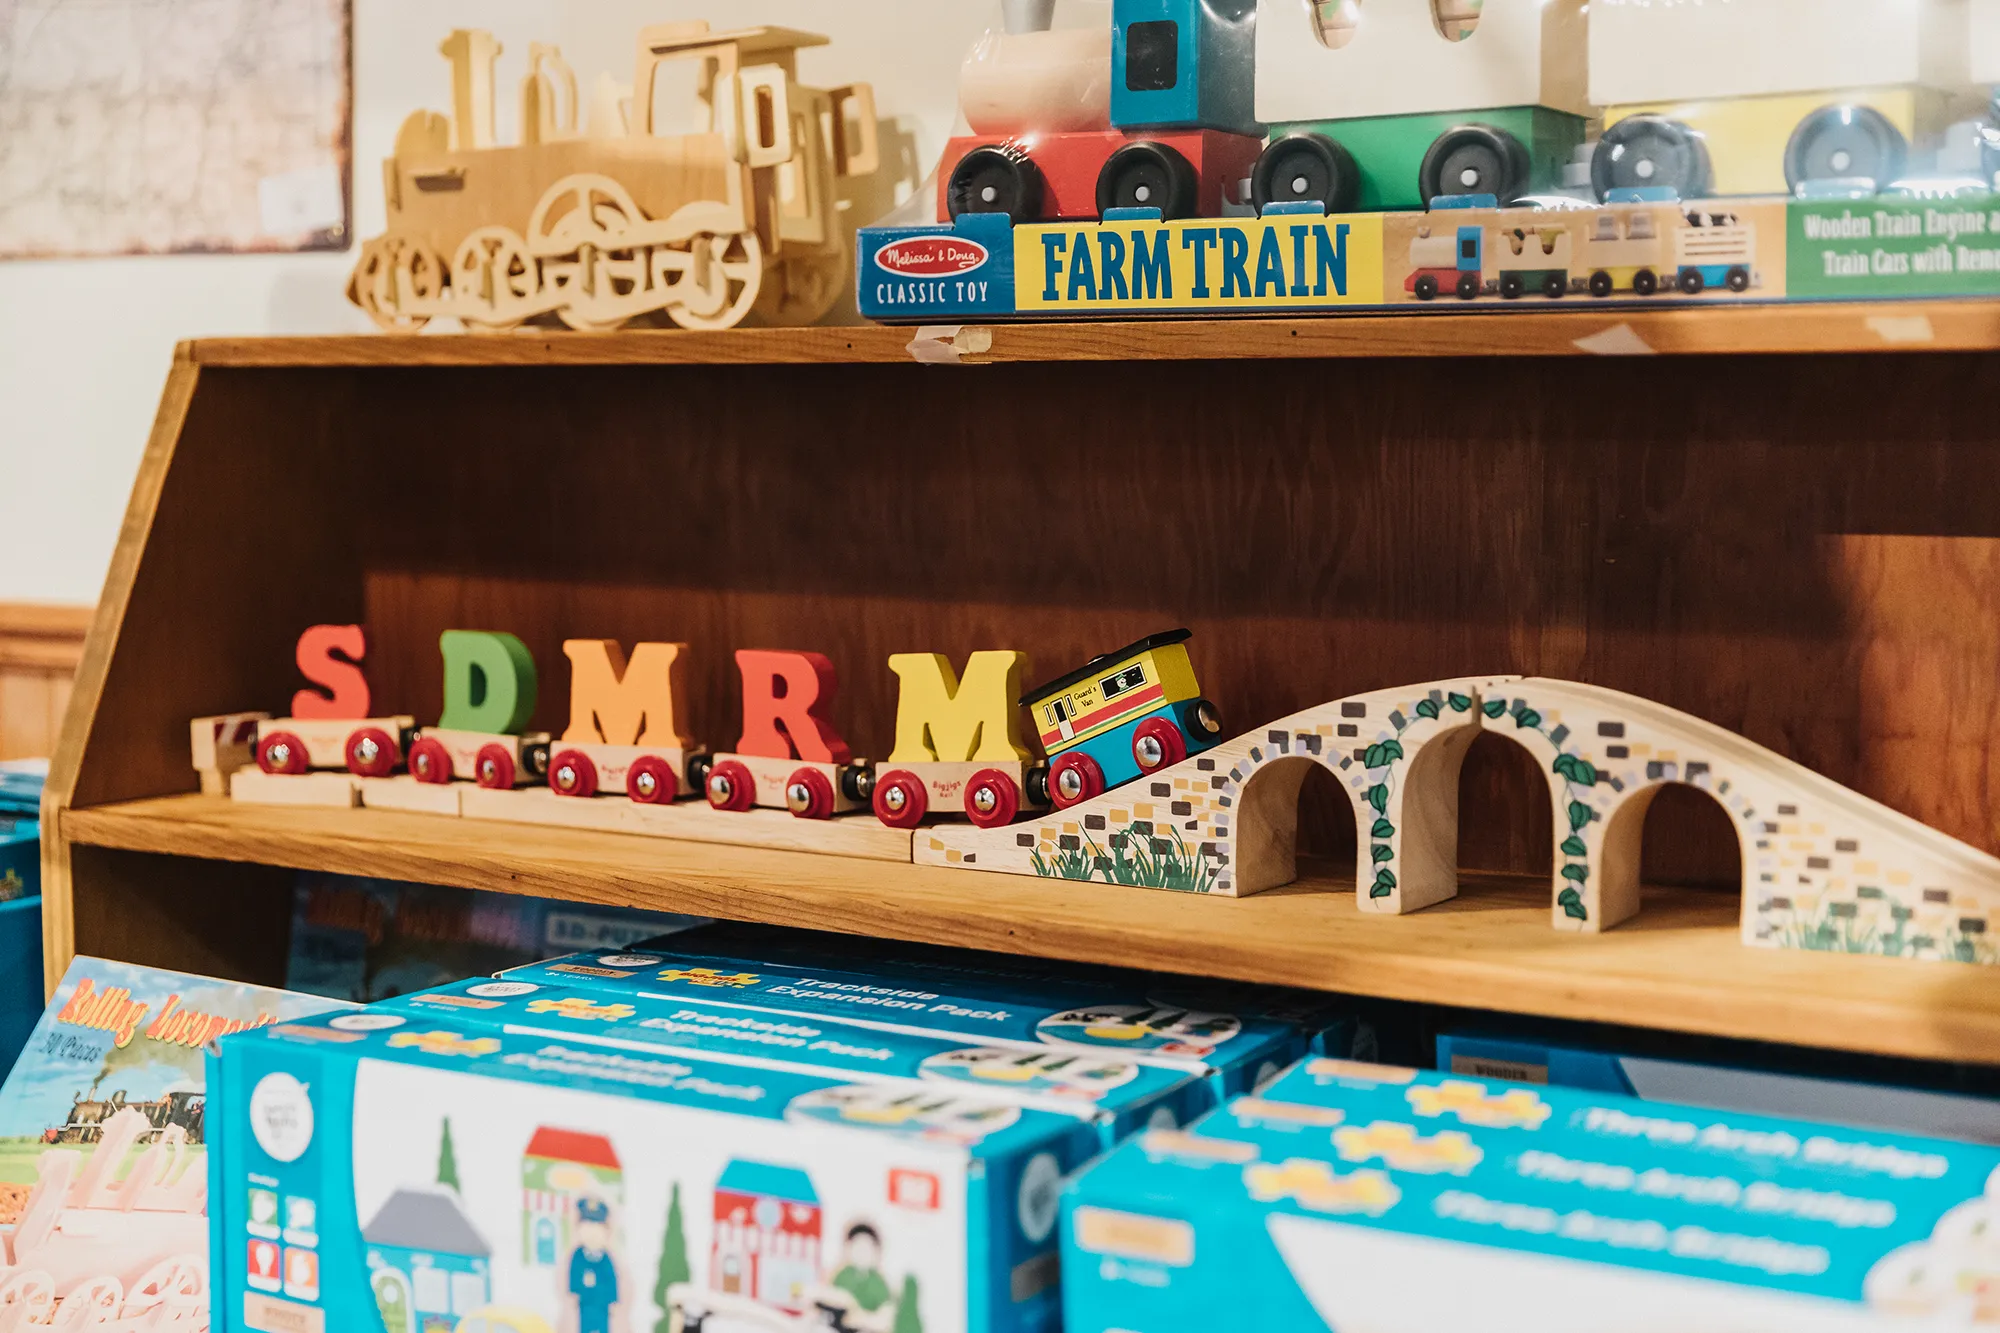 A display of wooden trains on tracks carrying colored letters SDMRM in the San Diego Model Railroad Museum gift shop.